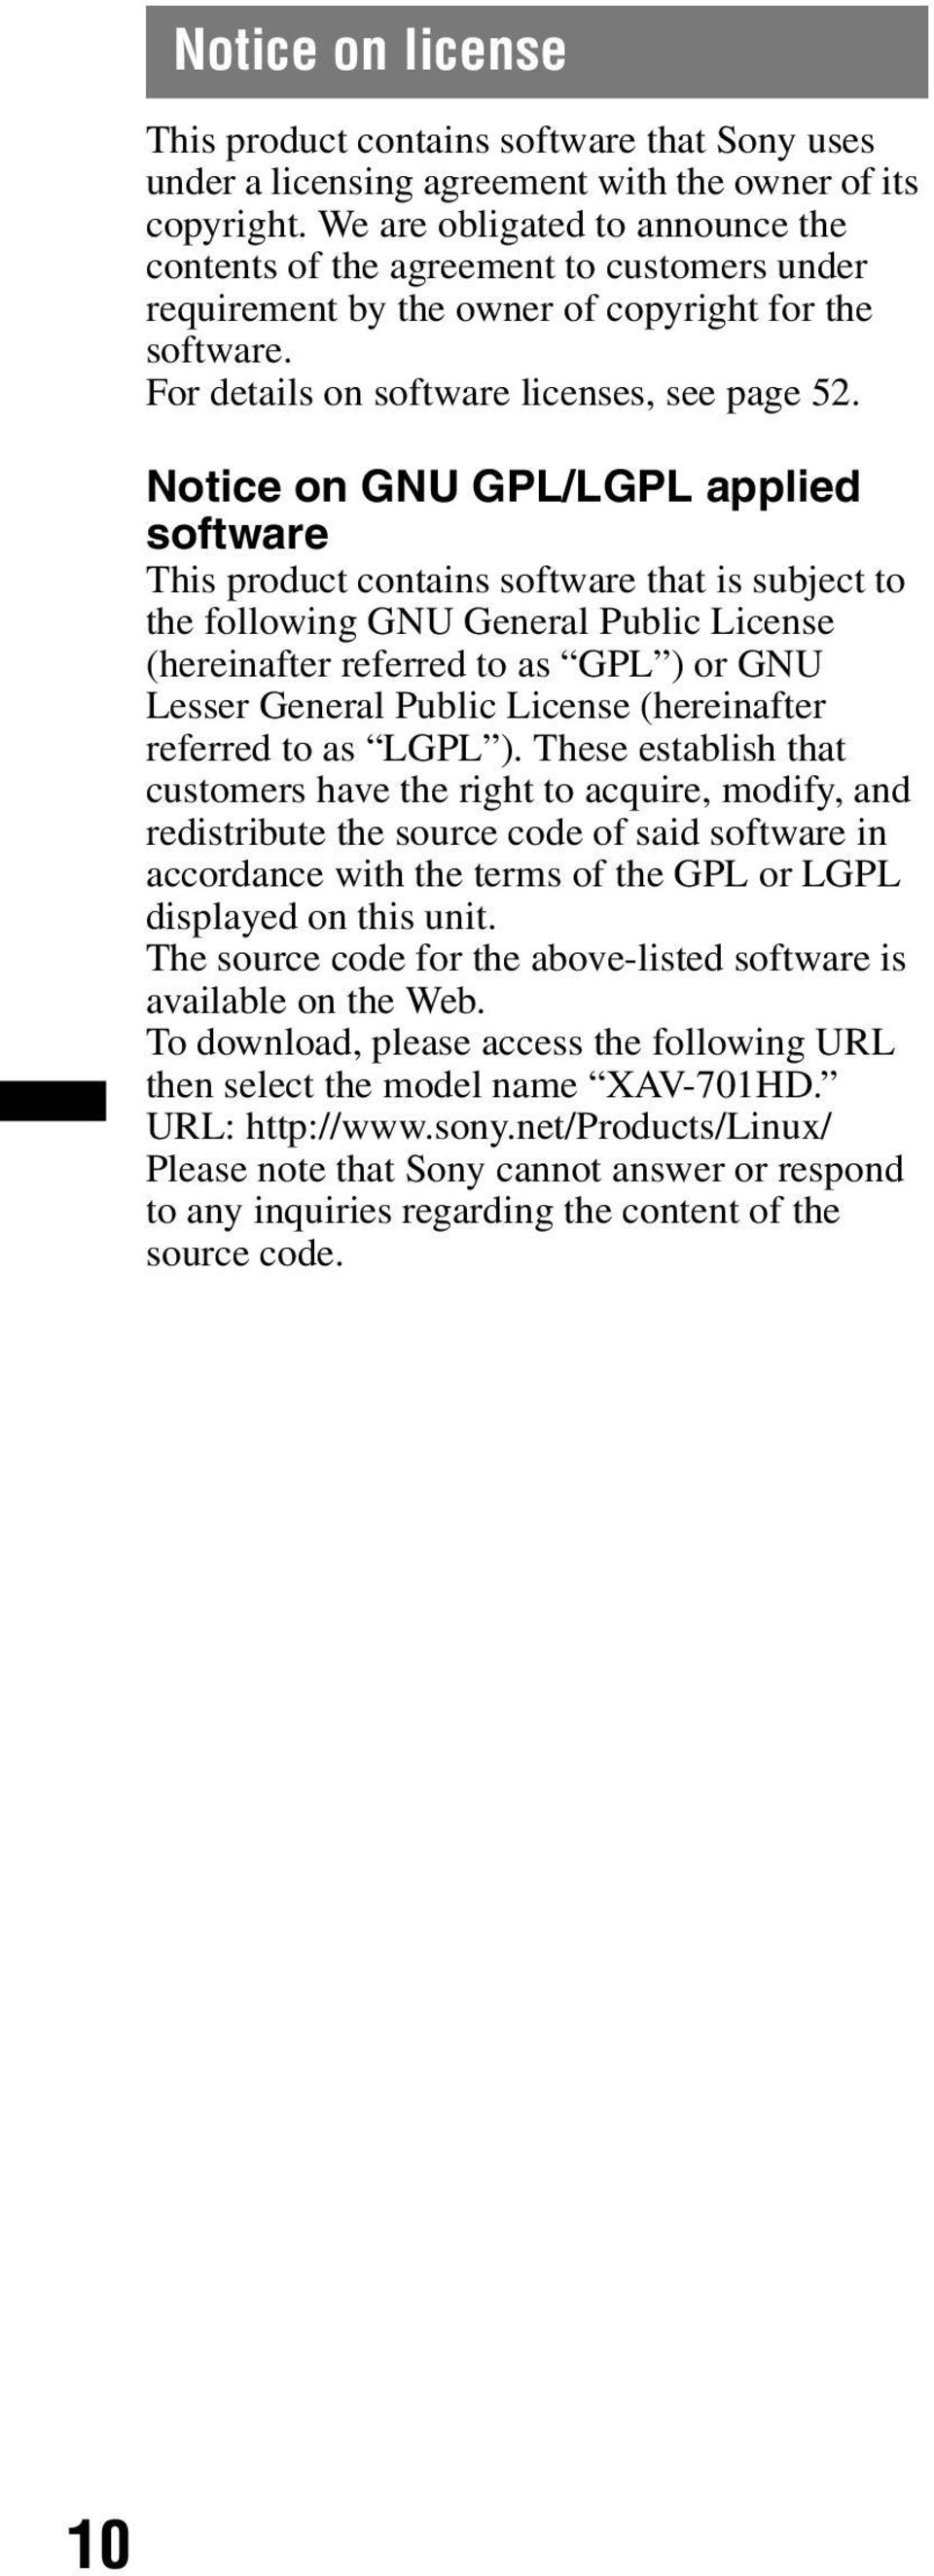 Notice on GNU GPL/LGPL applied software This product contains software that is subject to the following GNU General Public License (hereinafter referred to as GPL ) or GNU Lesser General Public